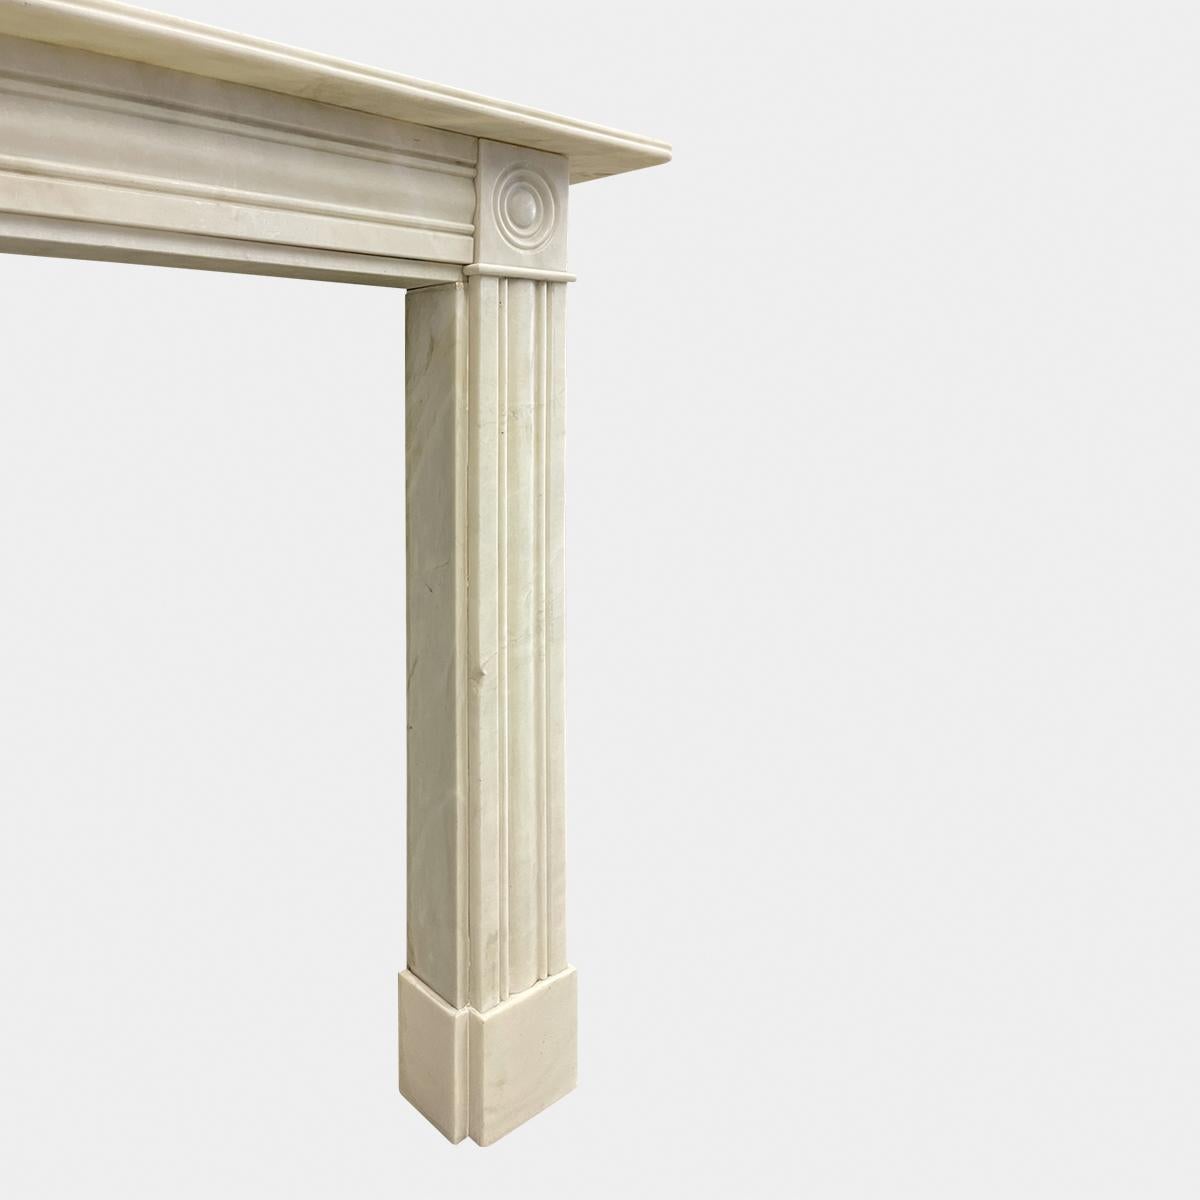 English A Reclaimed Regency Style Marble Fireplace Mantel 